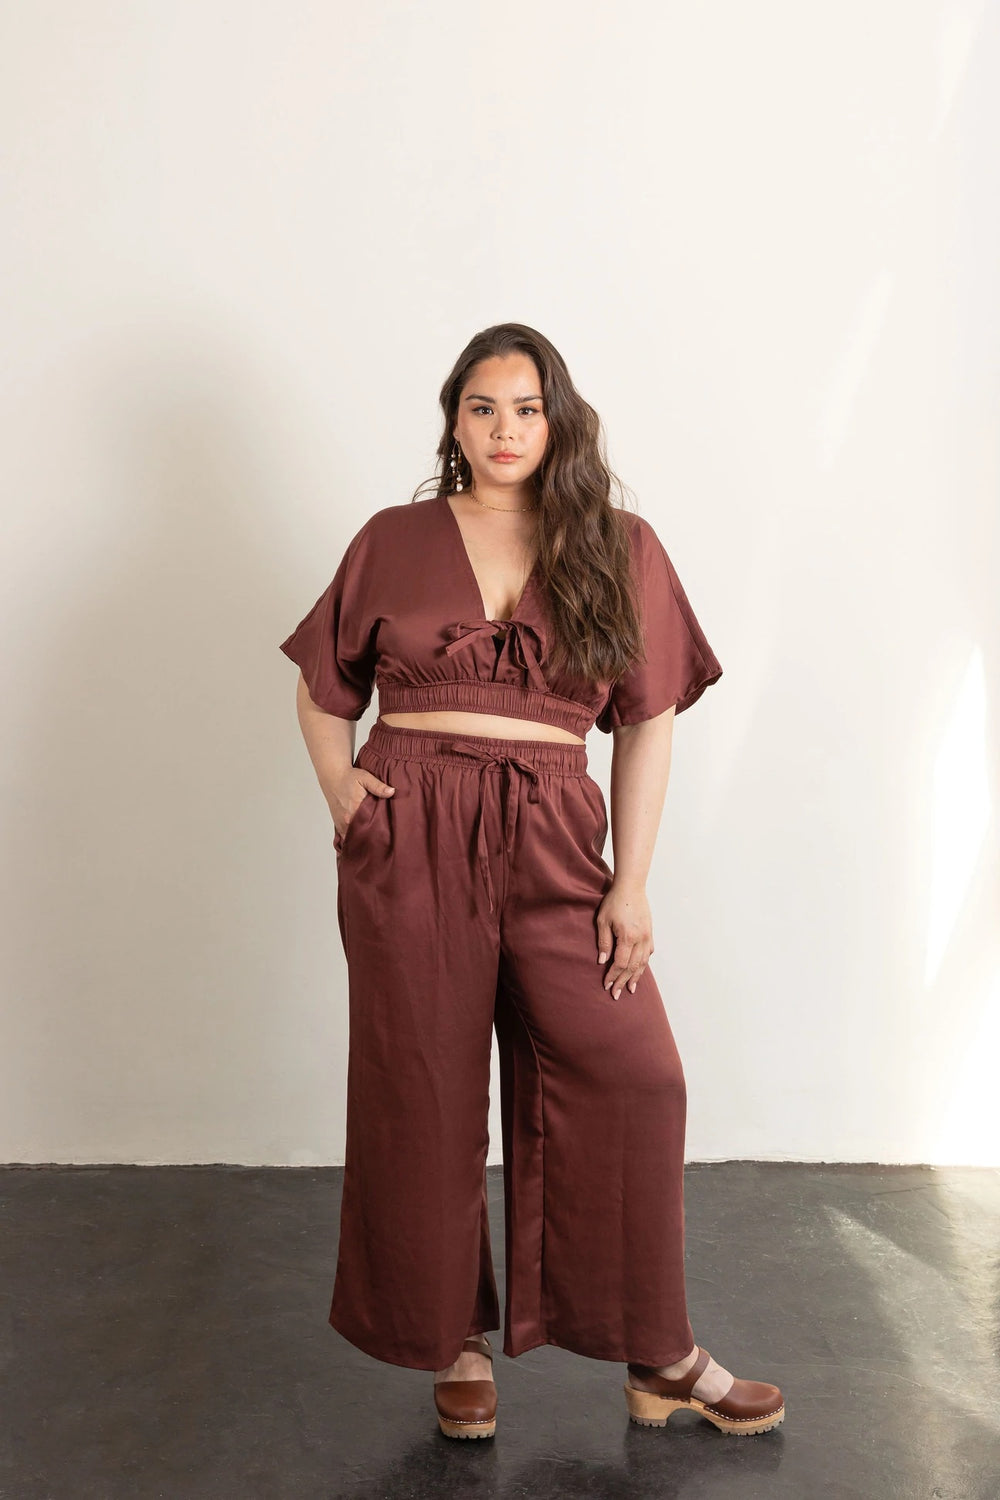 Woman wearing the Saguaro Set sewing pattern from Friday Pattern Company on The Fold Line. A trouser and top pattern made in linen, rayon, tencel, silk or cottons fabrics, featuring trousers with wide legs, relaxed fit, pockets, elasticated waist with dra